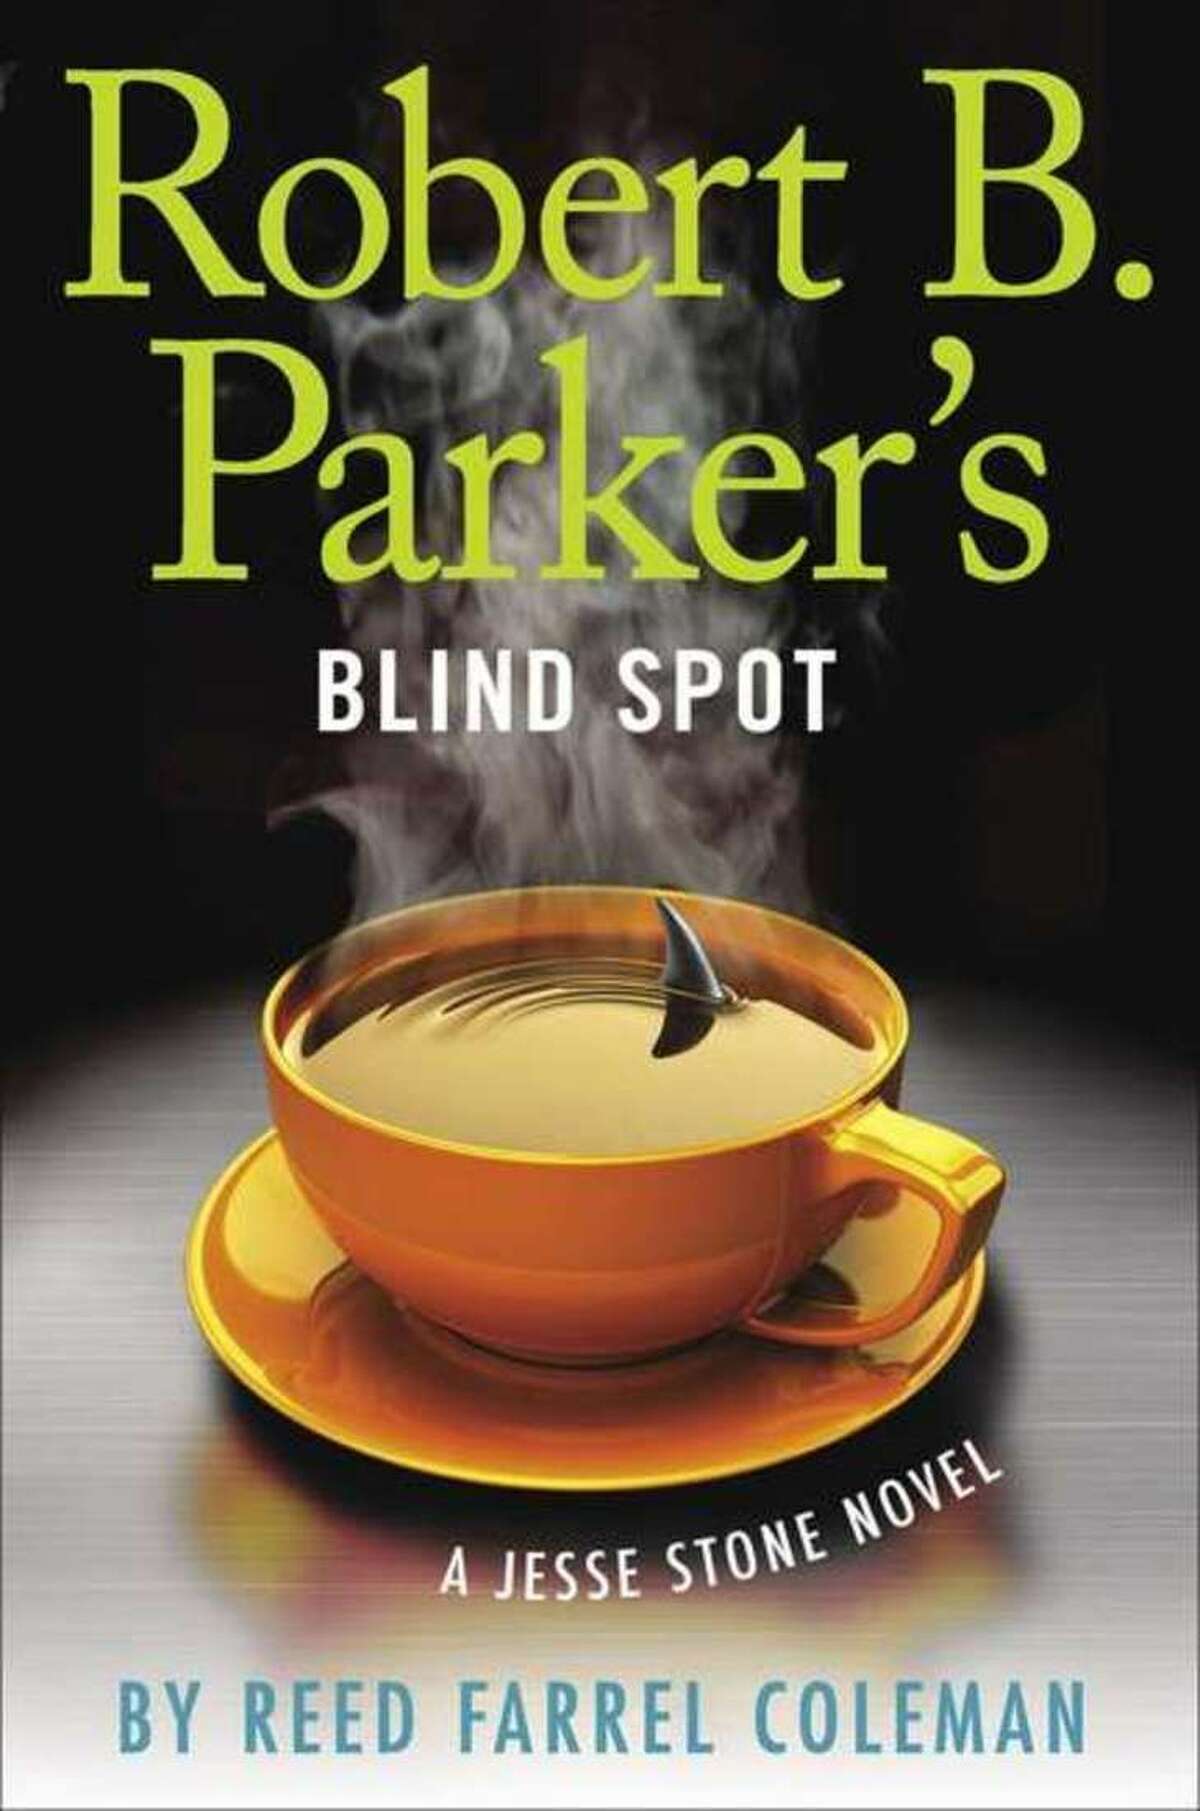 This book cover image released by G.P. Putnam?’s Sons shows "Blind Spot," by Robert B. Parker. (AP Photo/G.P. Putnam?’s Sons)